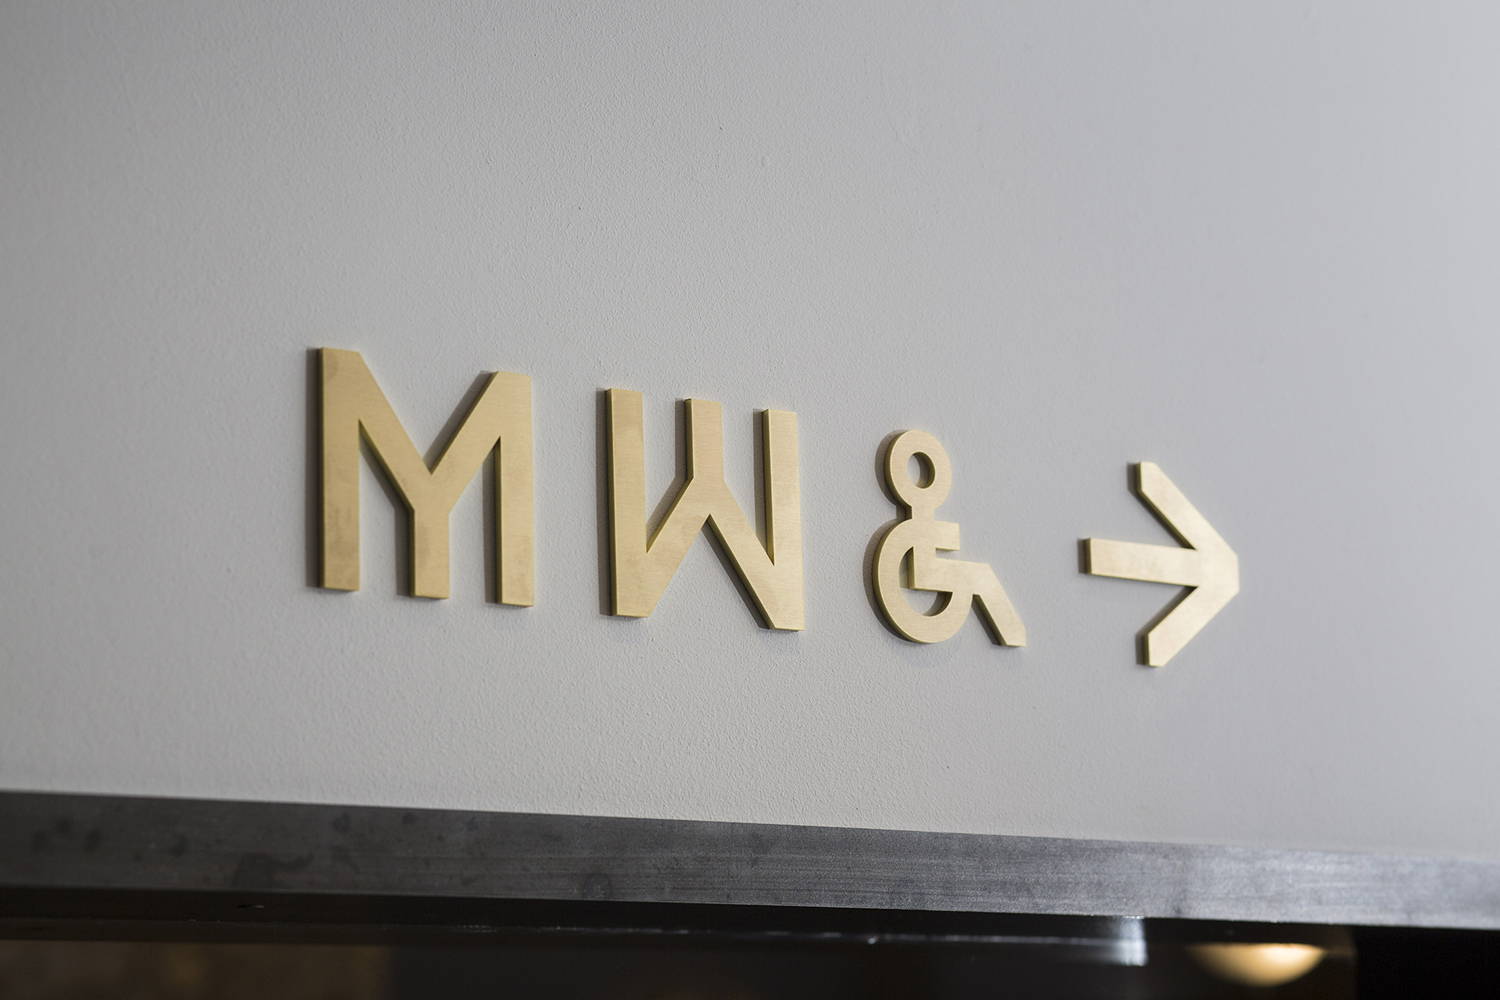 Branding and signage designed by Bibliothèque for Monica Galetti's new London restaurant Mere